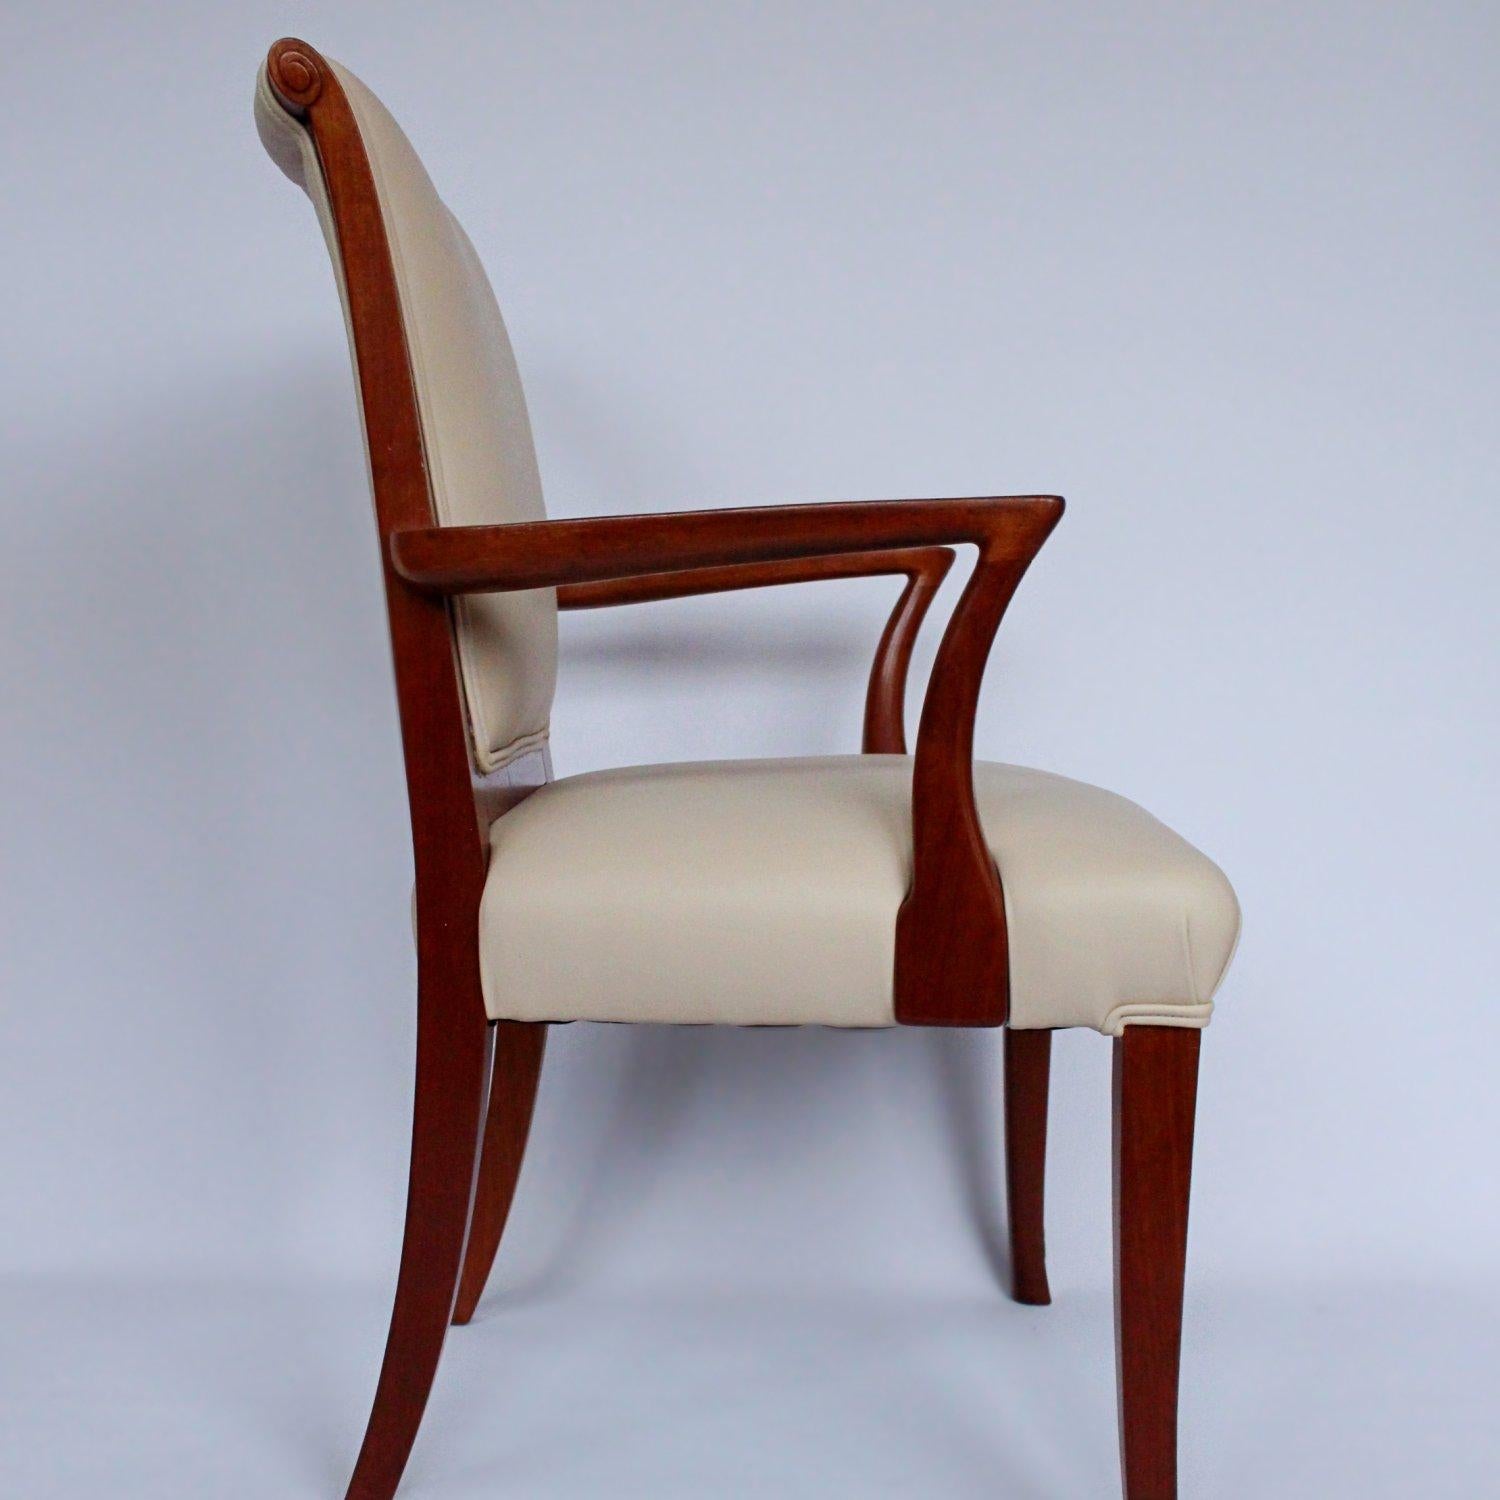 Polished Pair of Art Deco Side Chairs